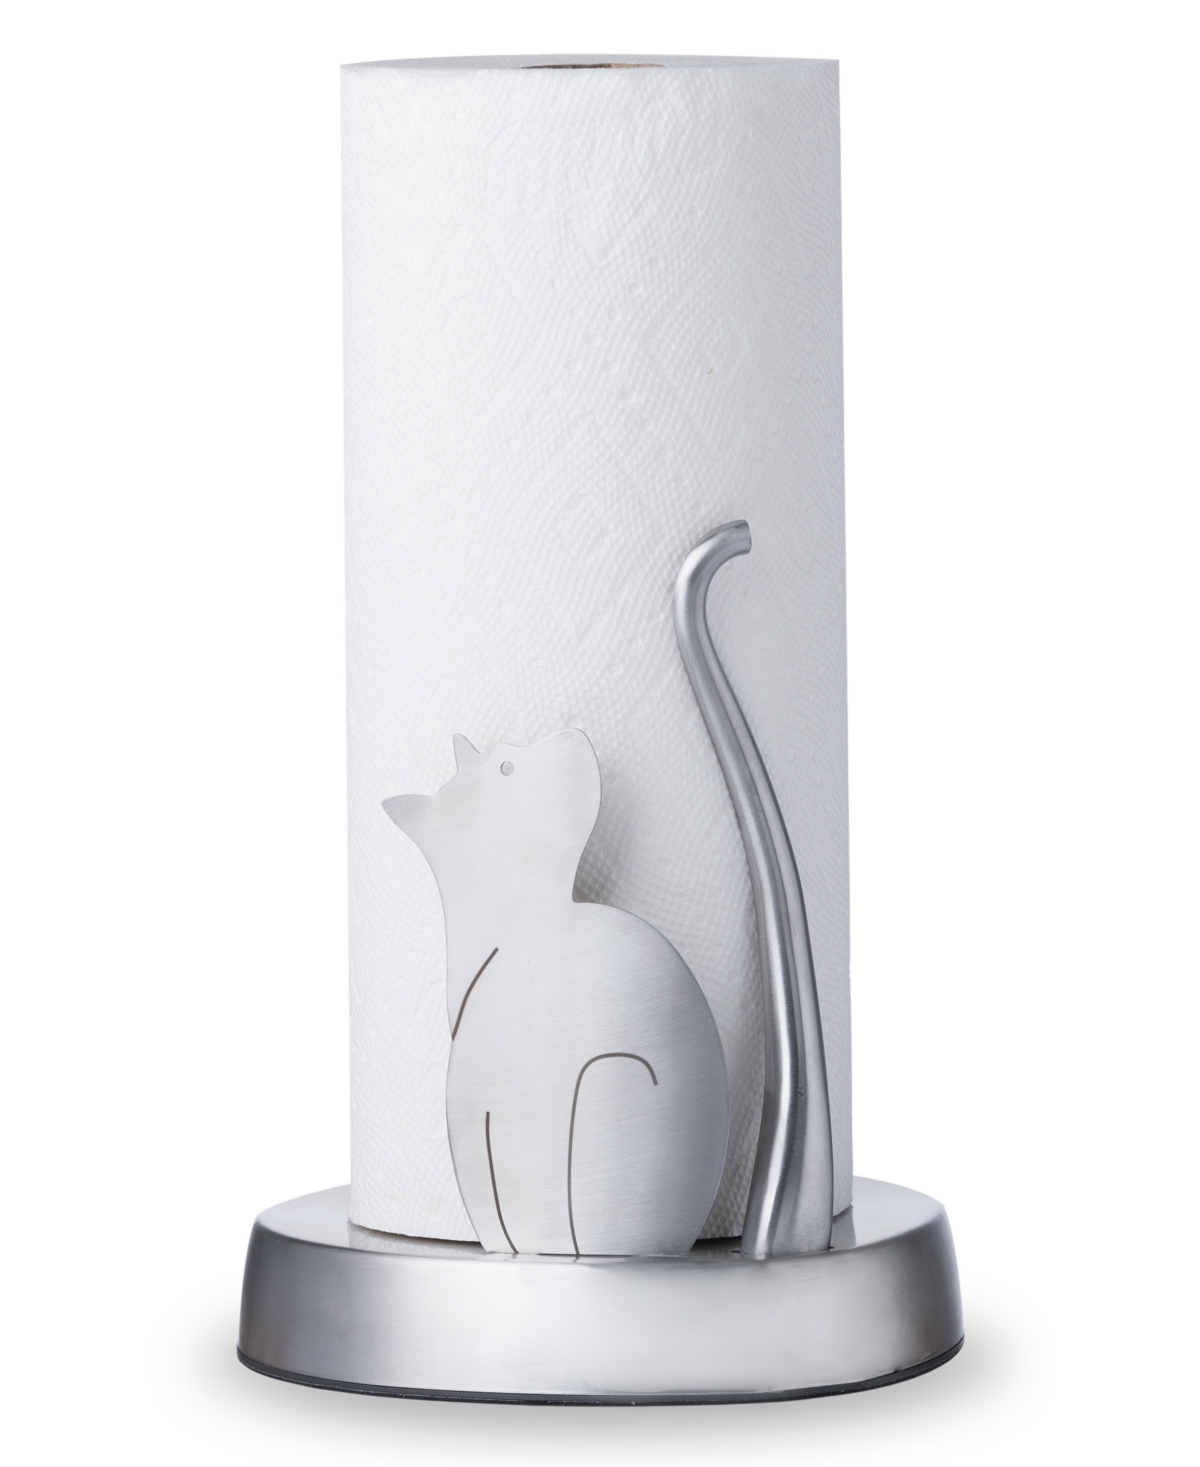 Everyday Solutions Meow Small Size Paper Towel Holder In Silver-tone